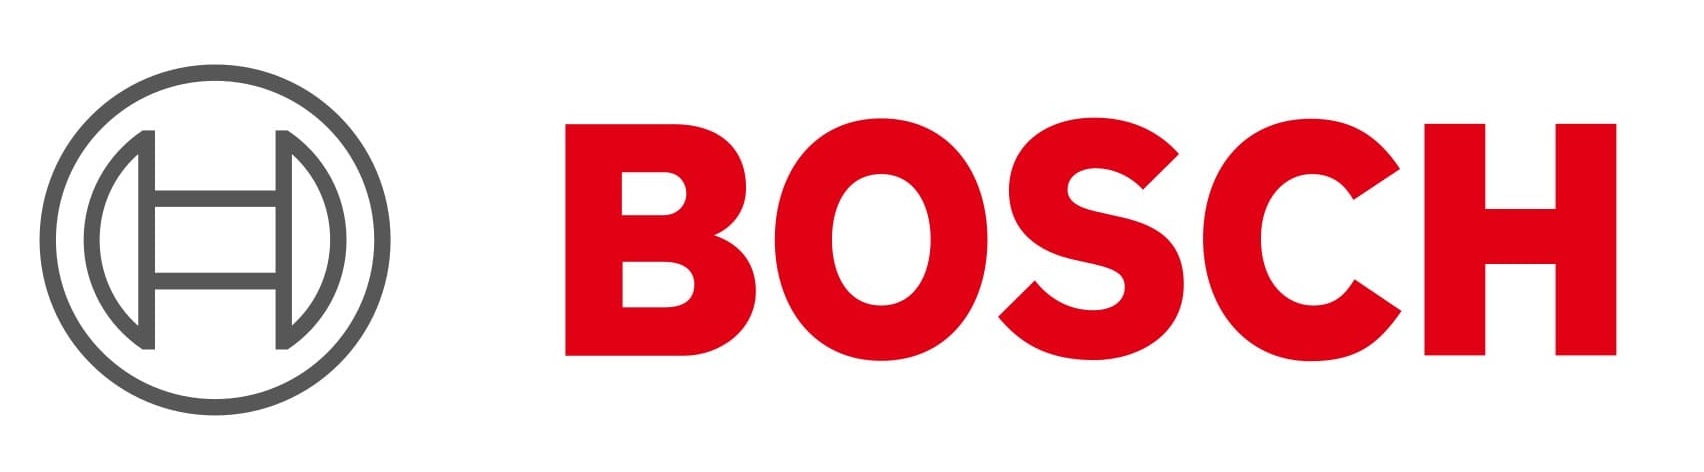 BOSCH Stoves Oven Repairs, Kenmore Oven Fix Near Me